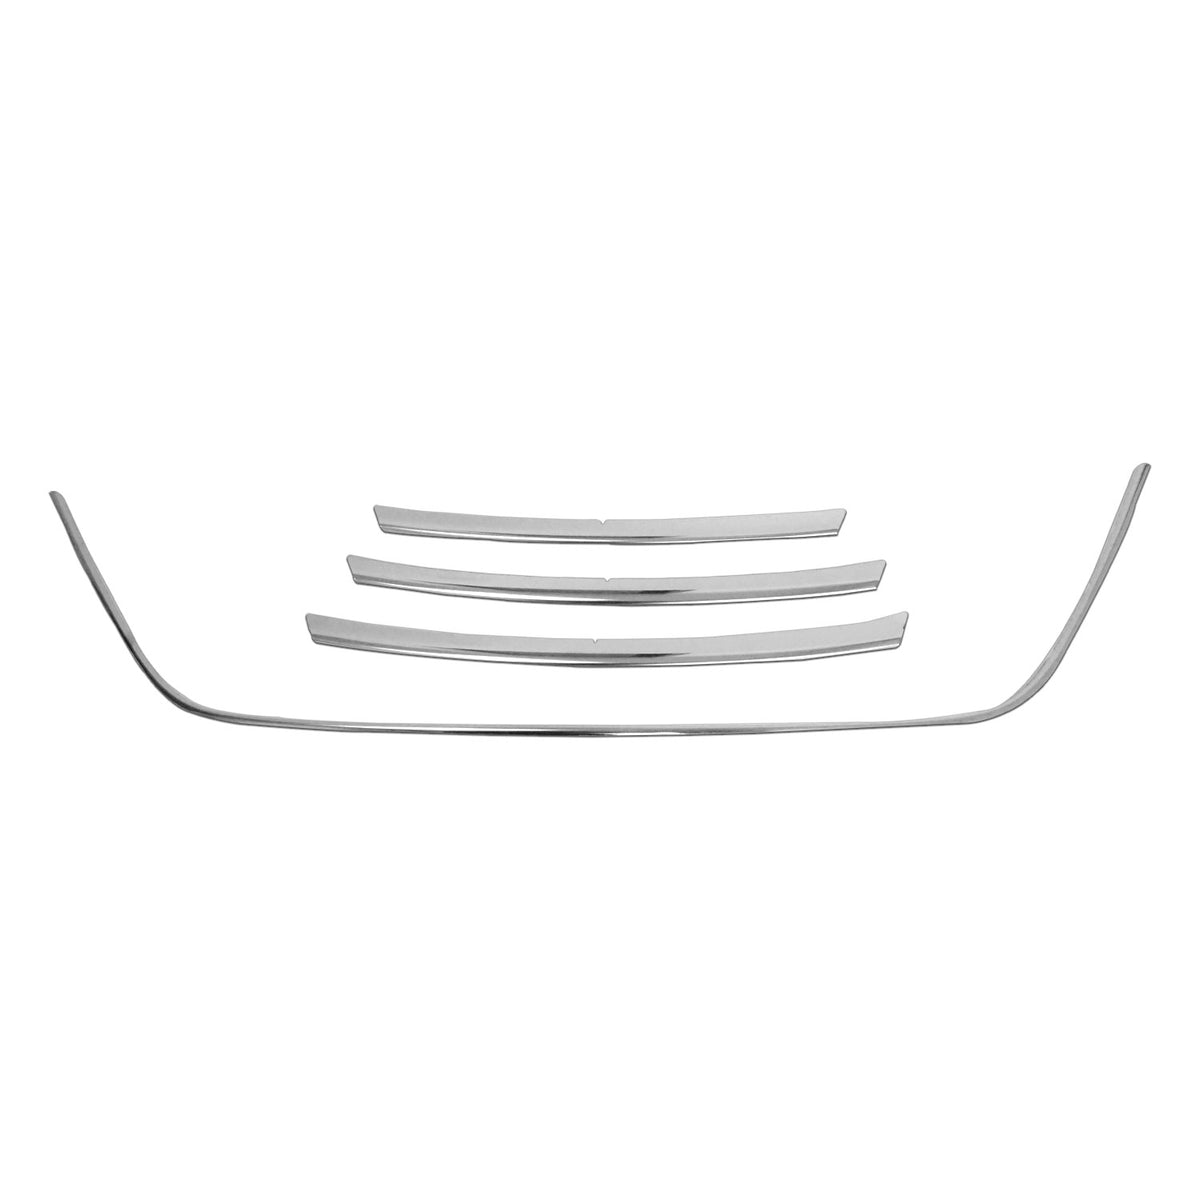 Radiator grille strips grill strips for Hyundai i30 2012-2017 stainless steel silver 4 pieces